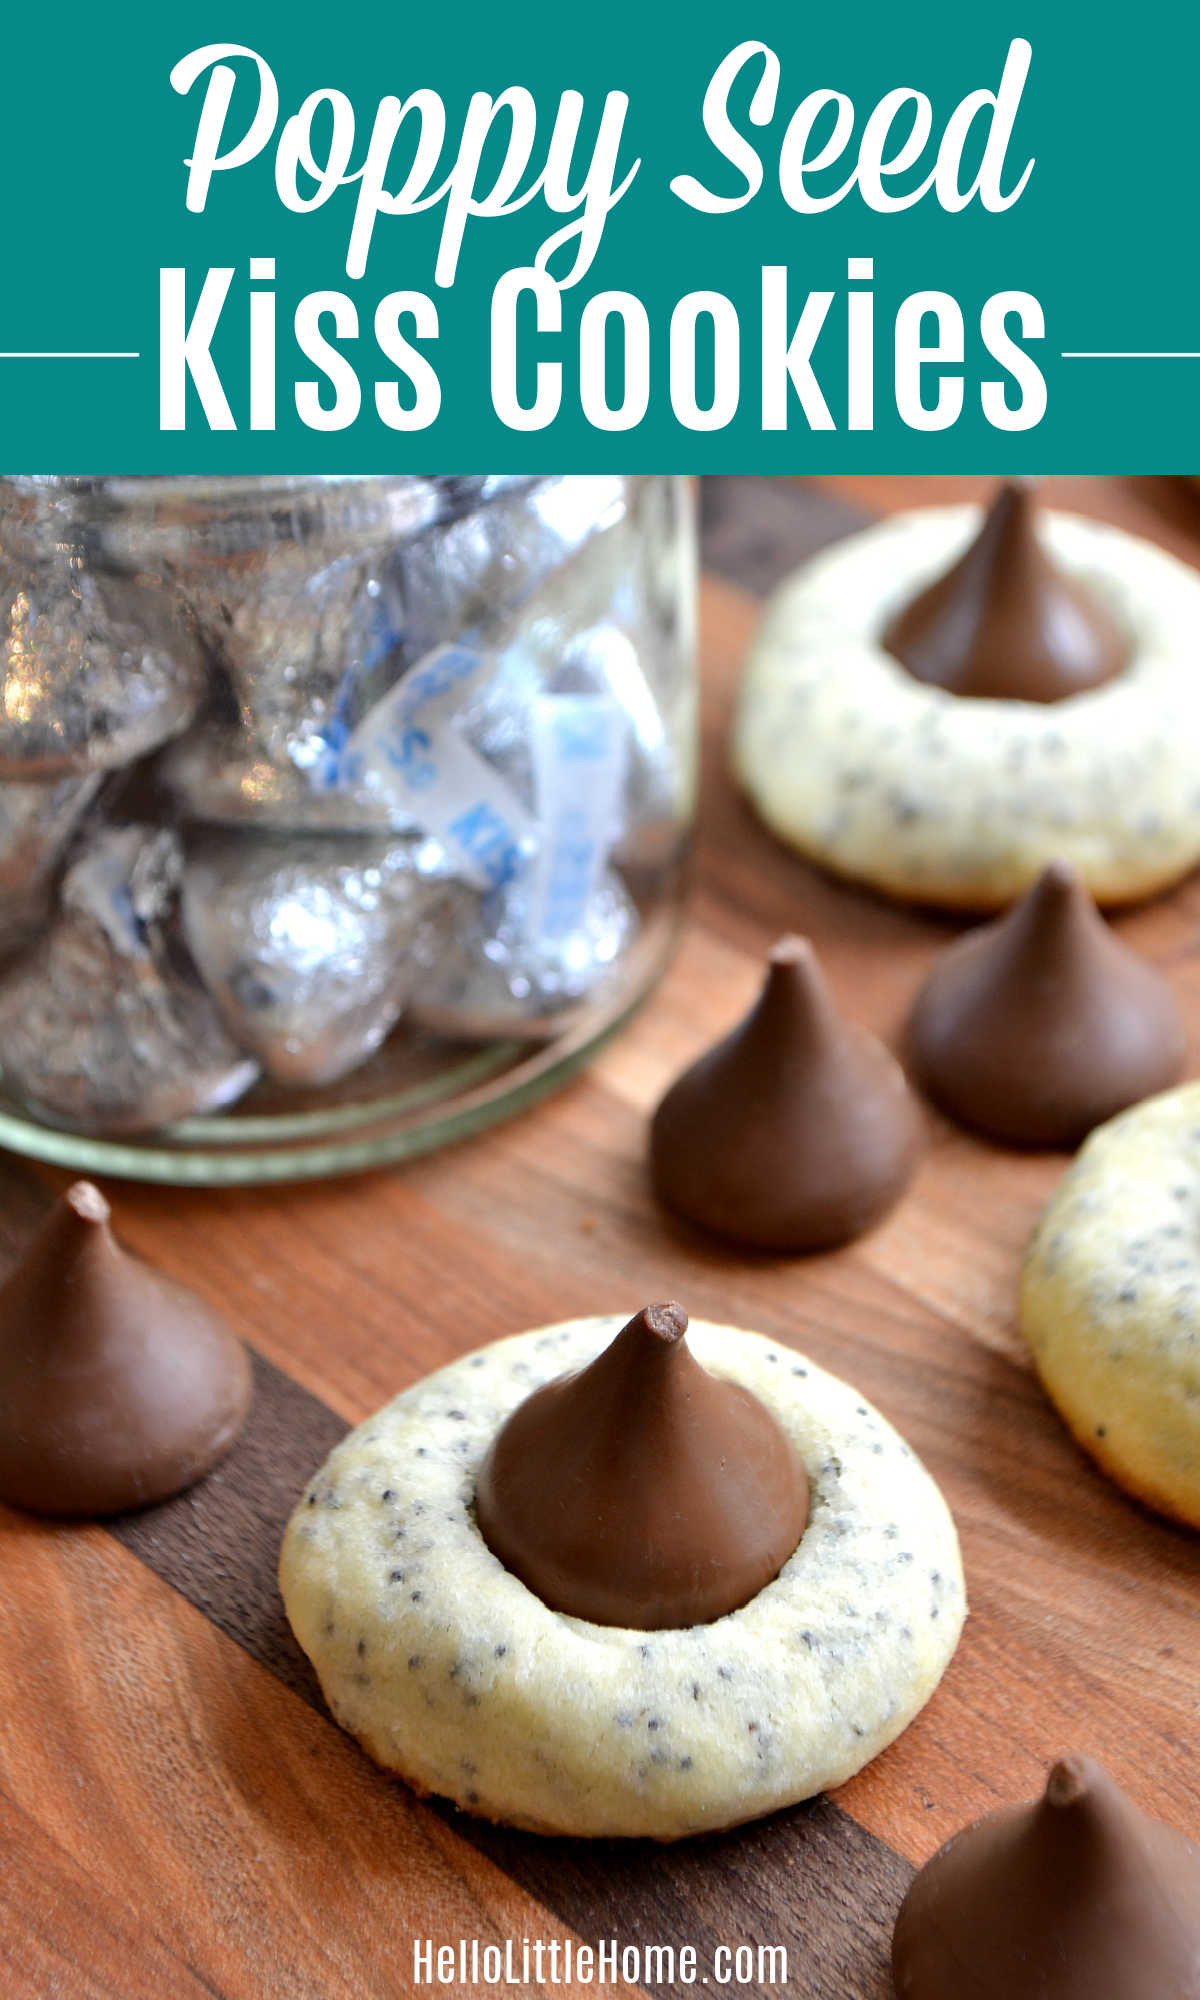 Poppy Seed Kiss Cookies on a wood counter with a jar of Chocolate Kisses behind them.